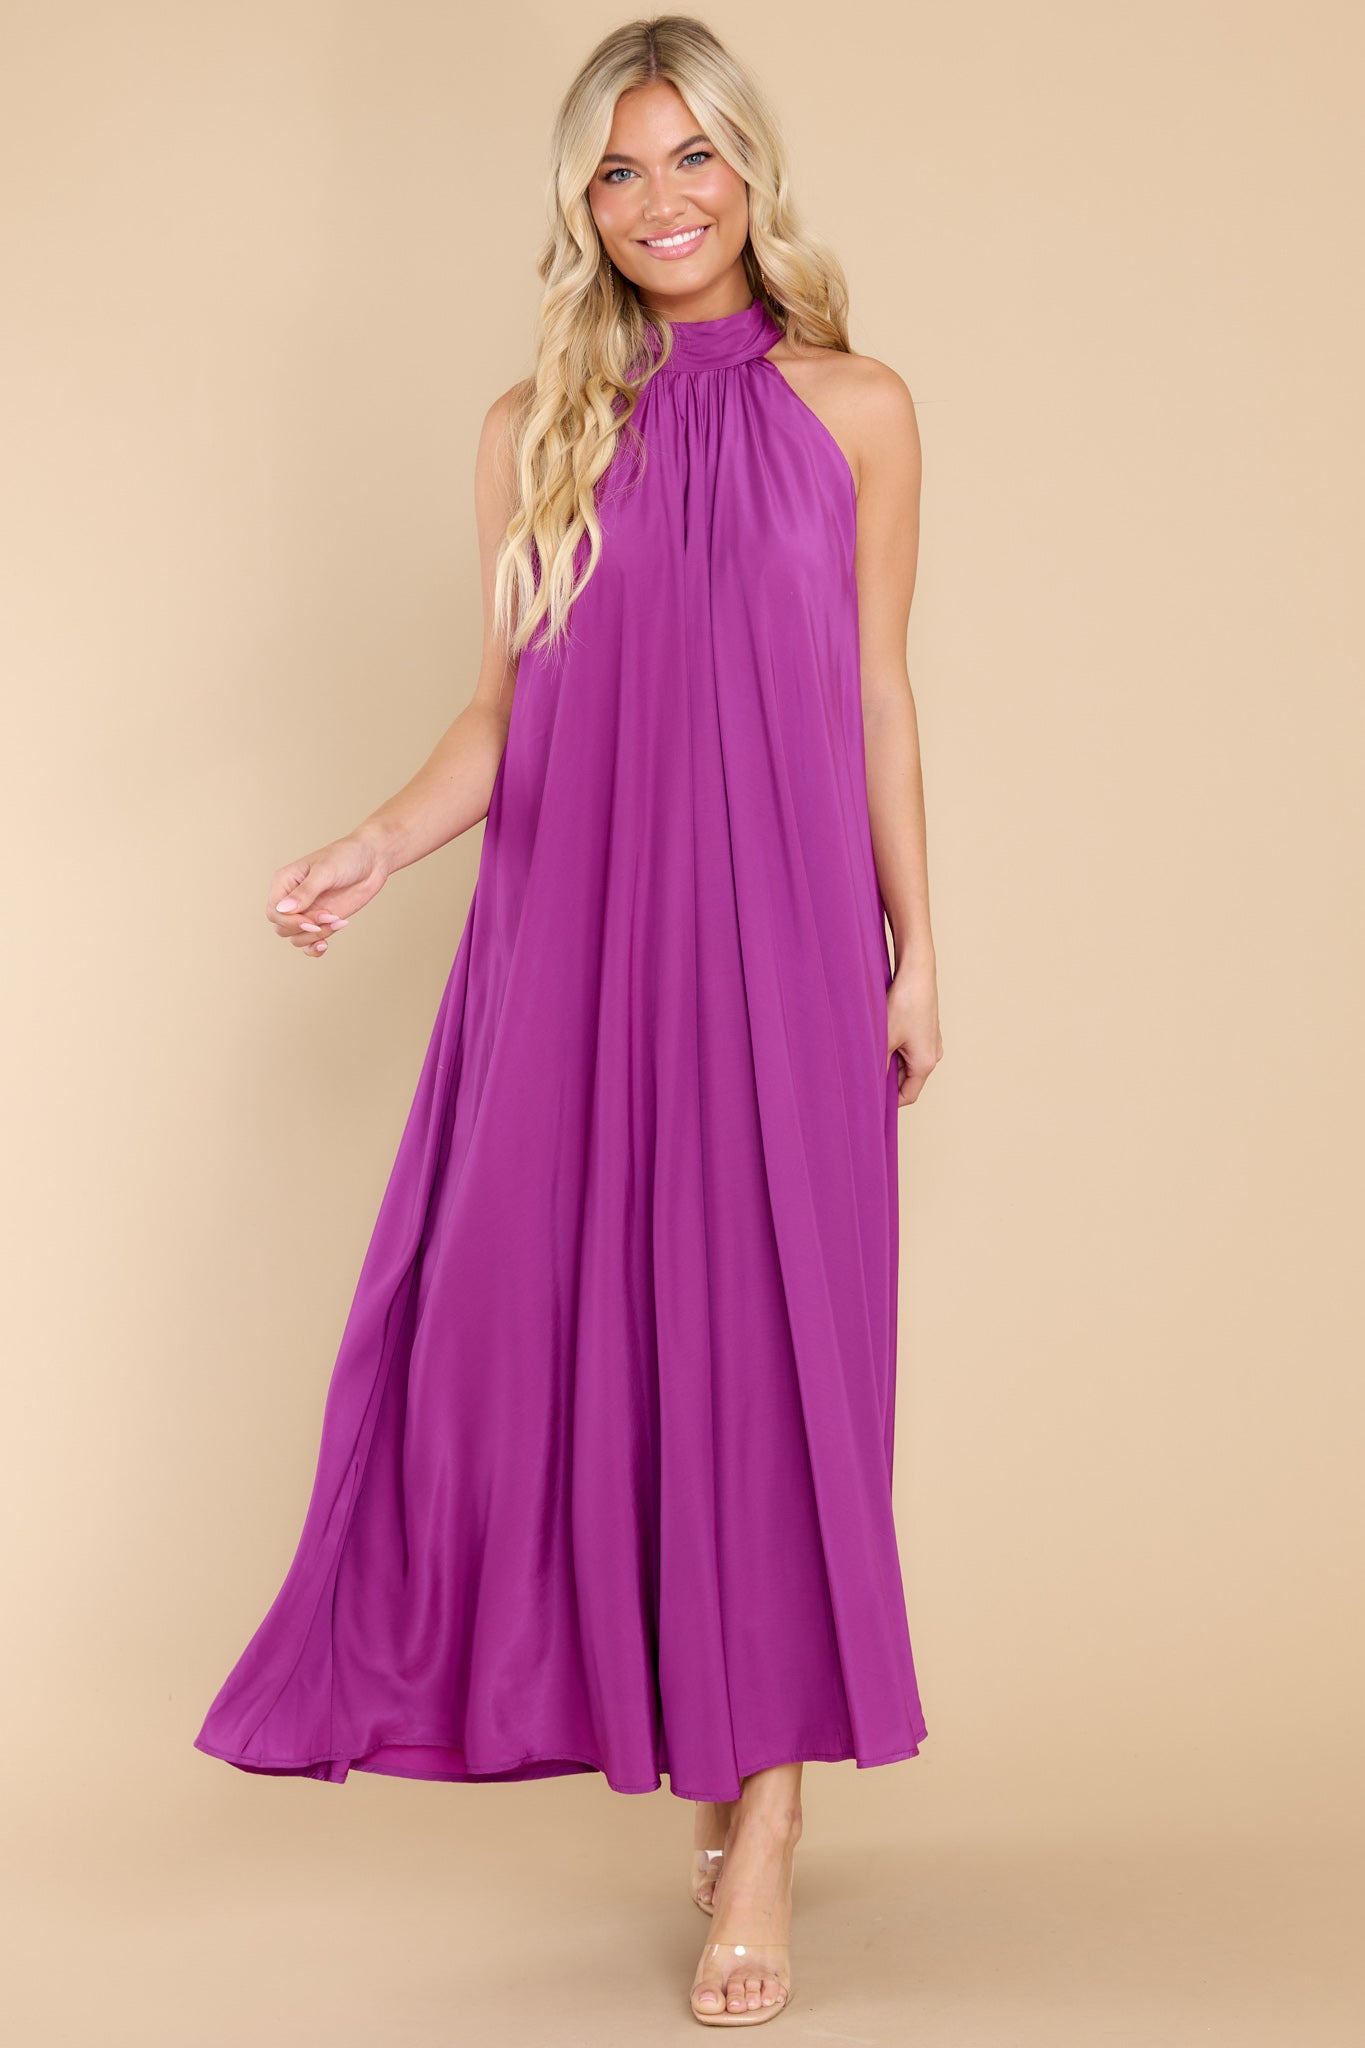 Lovely Bright Purple Tiered Maxi Dress - Colors Of Fall | Red Dress